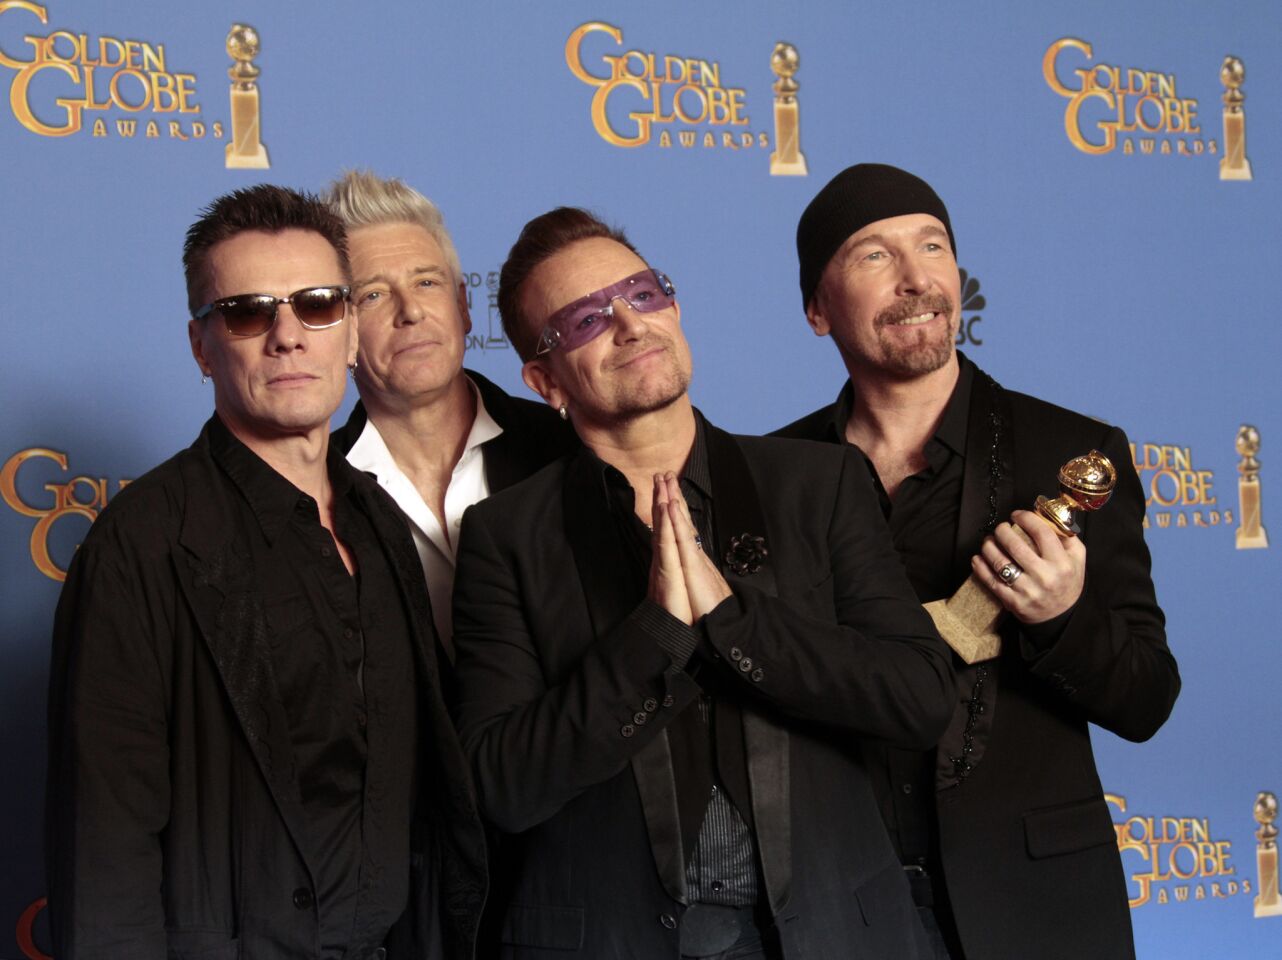 The Hollywood Foreign Press Assn. has a staunch defender in Bono, who seemed to urge reporters backstage at the Golden Globes on Sunday to take the award ceremony more seriously. "We kind of laugh about the foreign language press, [but] we have values in European cinema," the U2 frontman said after their original song "Ordinary Love" was named the best of the year. "We see things differently. It's just a different aesthetic. I think the Golden Globes is really important for that." Writing a song for "Mandela: Long Walk to Freedom": Bono recalled spending time on Robben Island with Mandela, "hearing his voice crack" as he recalled his experience being imprisoned for 18 years there. "He's so stoic and so kind of dismissive of his own pain," Bono said. "I'm not sure if you know this, but Mr. Mandela -- from cutting rocks on Robben Island with salt -- had lost use of his tear ducts. So this great man -- through all this historical drama -- was unable to cry."